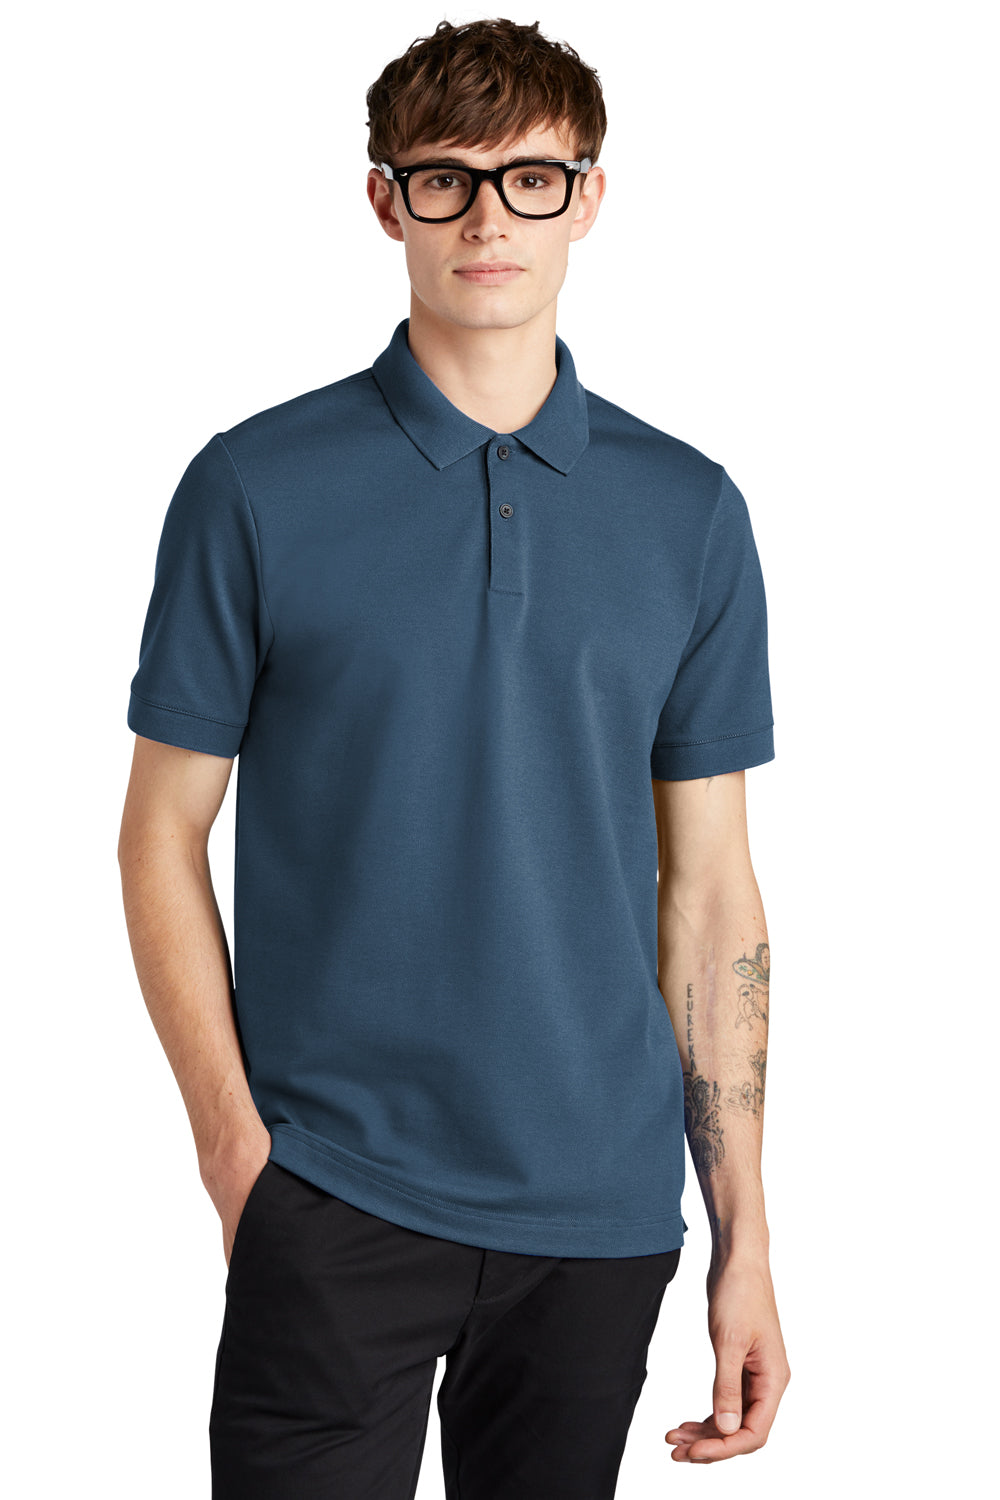 Mercer+Mettle MM1000 Stretch Pique Short Sleeve Polo Shirt Insignia Blue Front